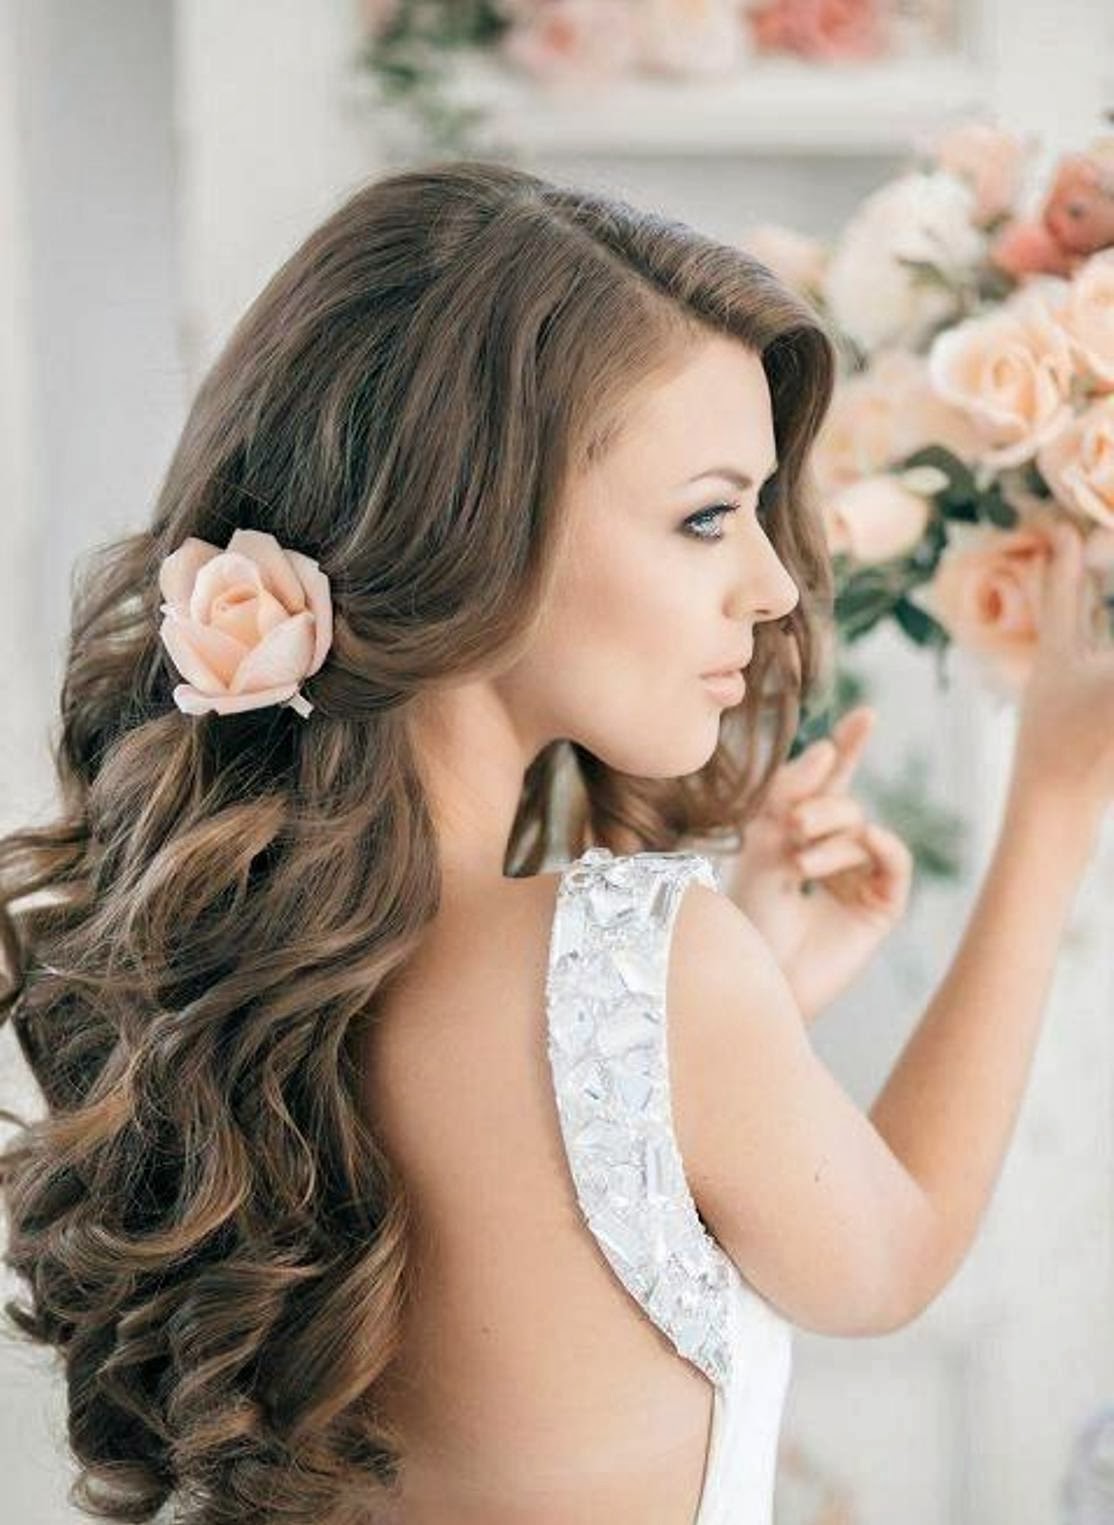 hairstyles for long hair wedding guest hairstyles for long hair